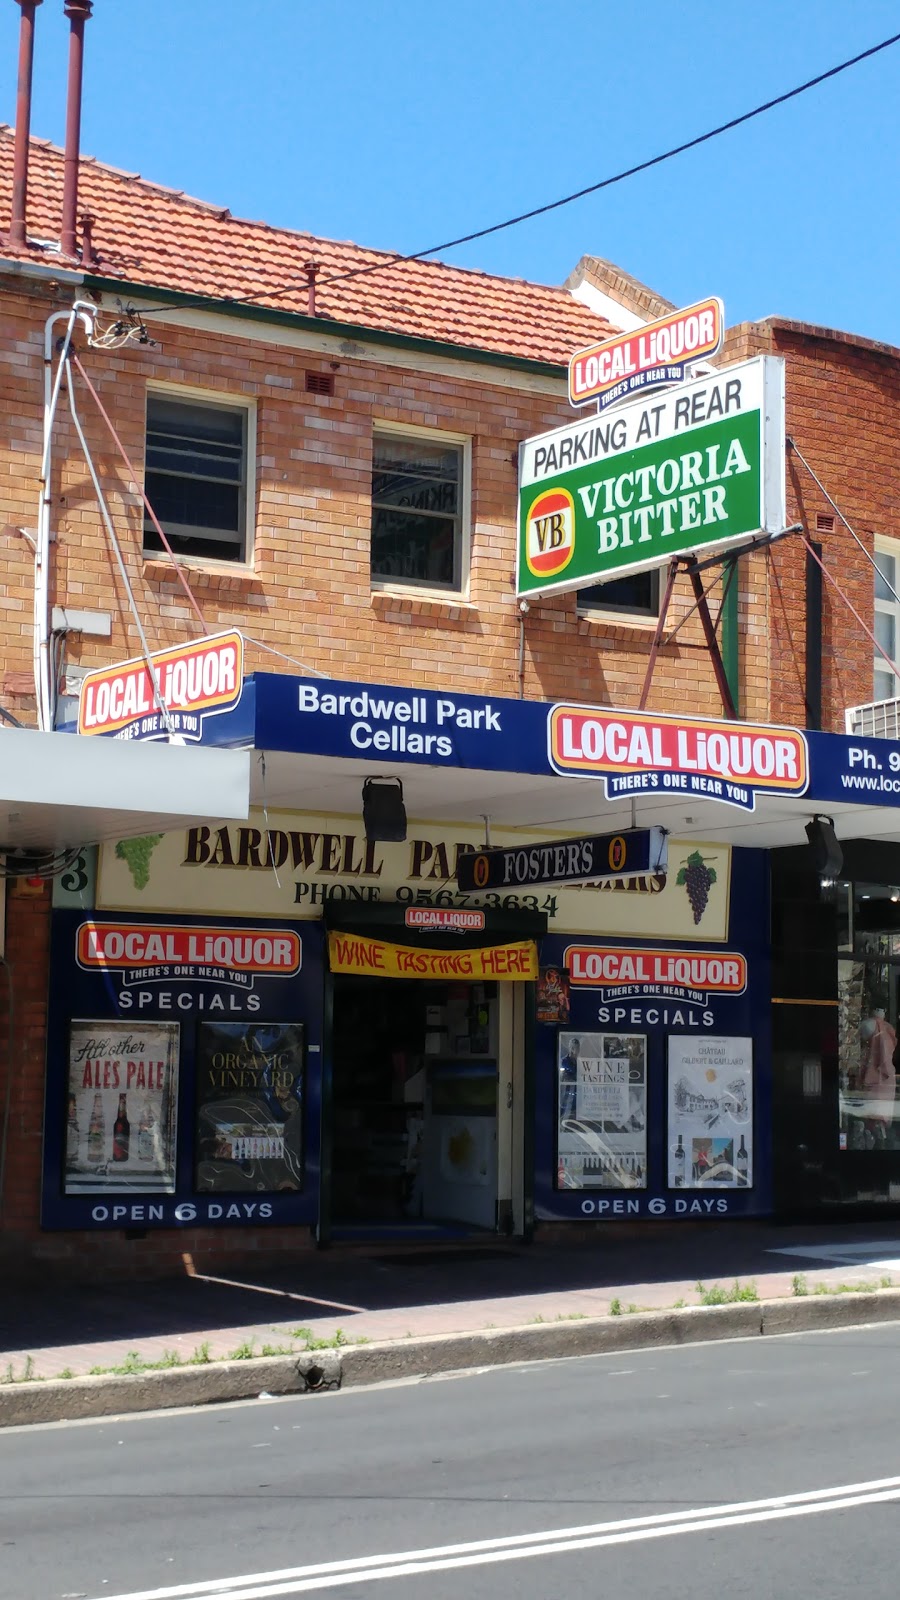 Bardwell Park Cellars | store | 3 Hartill-Law Ave, Bardwell Park NSW 2207, Australia | 0295673634 OR +61 2 9567 3634